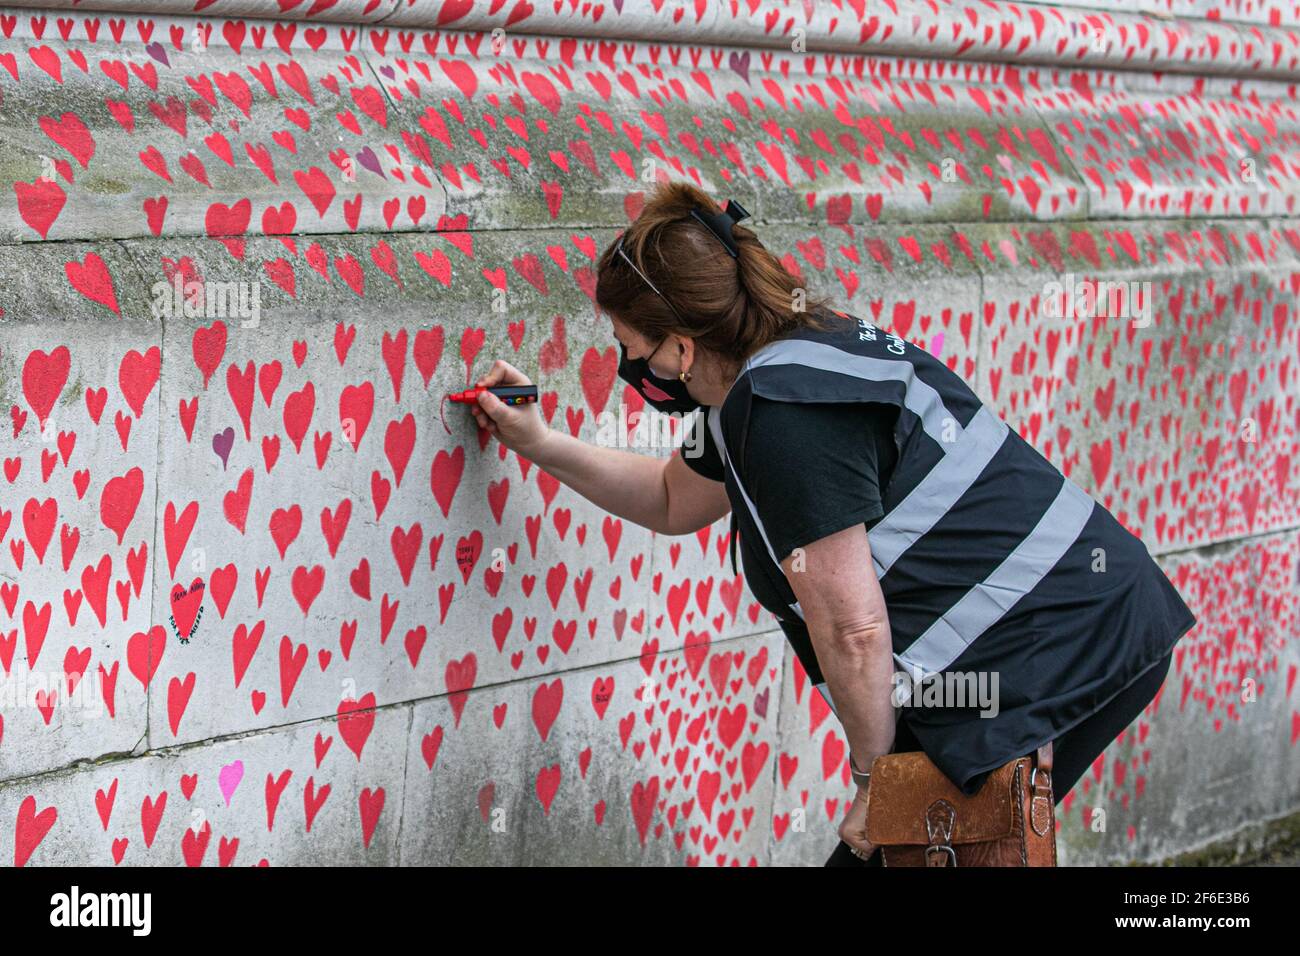 WESTMINSTER LONDON, UK 31 March 2021. Individual red hearts are painted by NHS volunteers along  the new National Covid Memorial Wall opposite Parliament on the Thames embankment which has been created by the Covid-19 Bereaved Families for Justice to remember each of the lives lost to the coronavirus pandemic thought to be responsible for more than 125,000 deaths in the UK over the past 12 months  Credit amer ghazzal/Alamy Live News Stock Photo